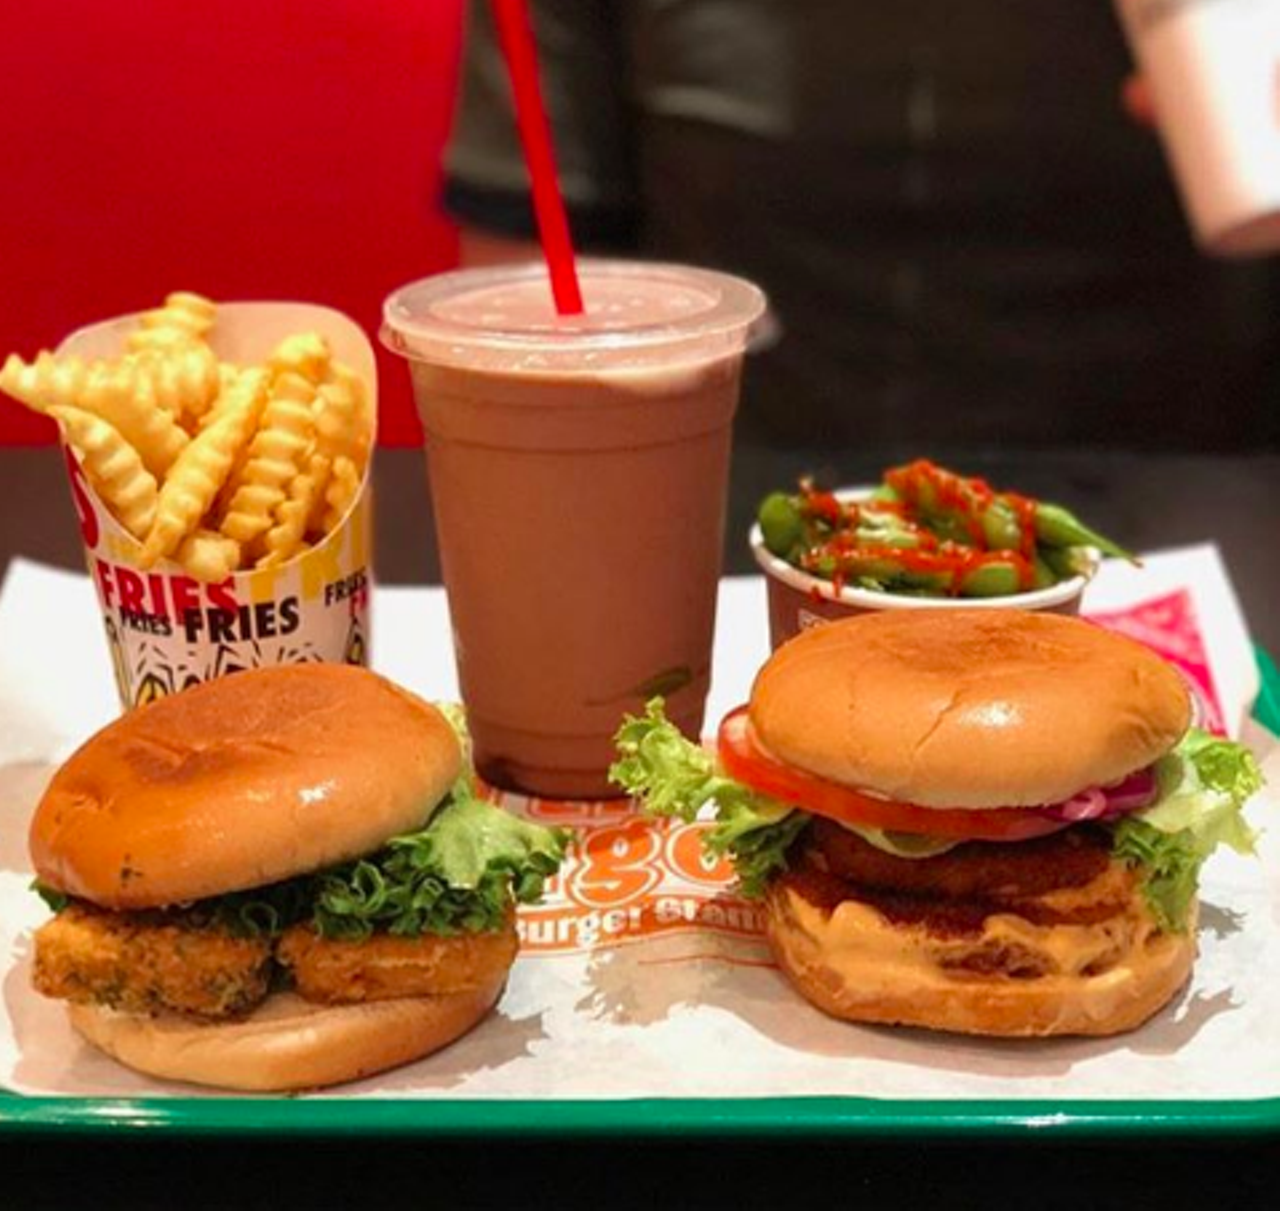 Earth Burger
2501 Nacogdoches Road, (210) 476-5010, eatearthburger.com
Earth Burger opened its second San Antonio location in mid-June. The growing chain offers vegetarian and vegan-friendly options for green-eaters.
Photo via Instagram / earth_burger